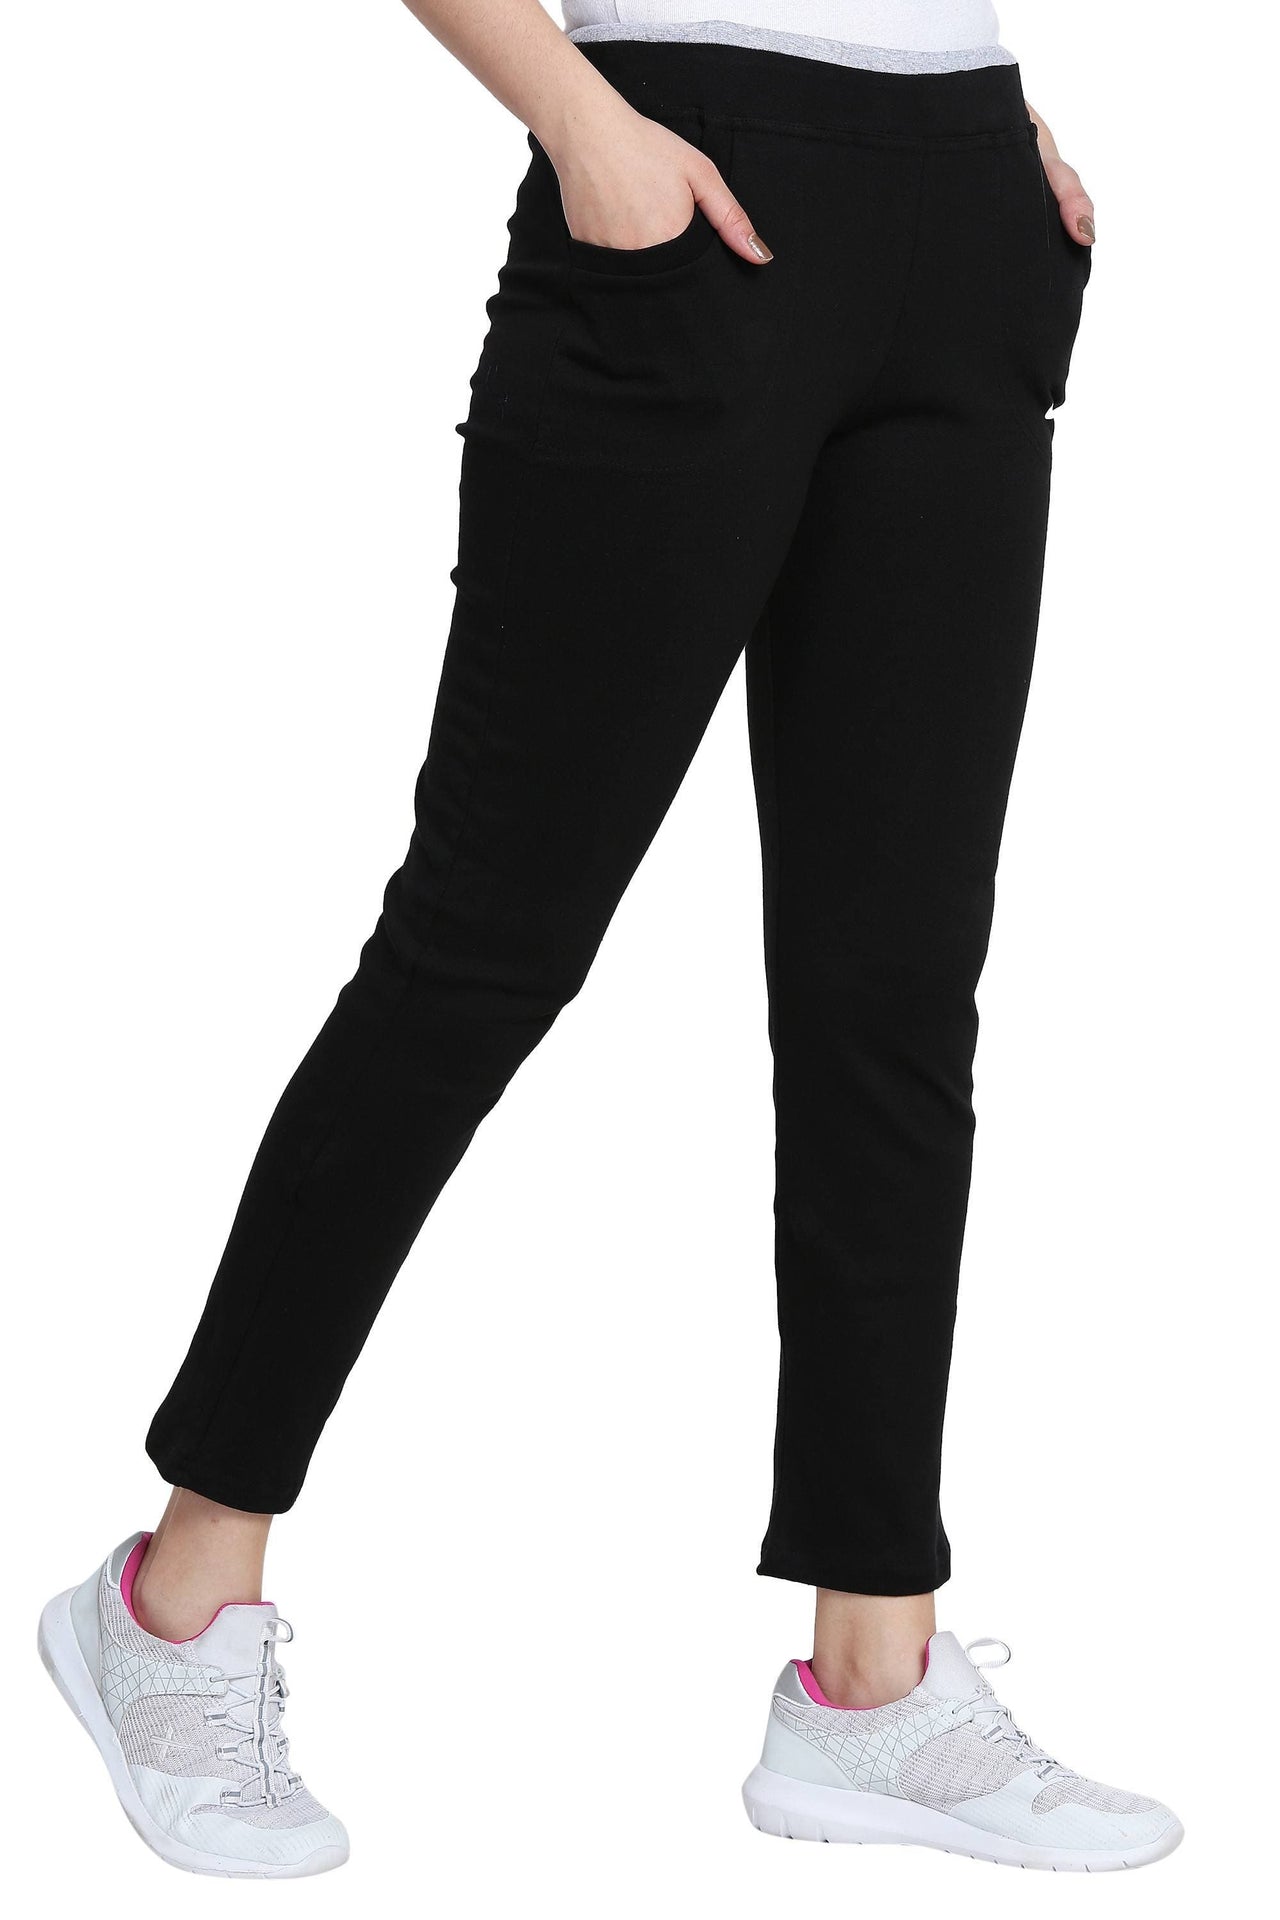 Asmaani Black color Hosiery Lower with Two Side Pockets.